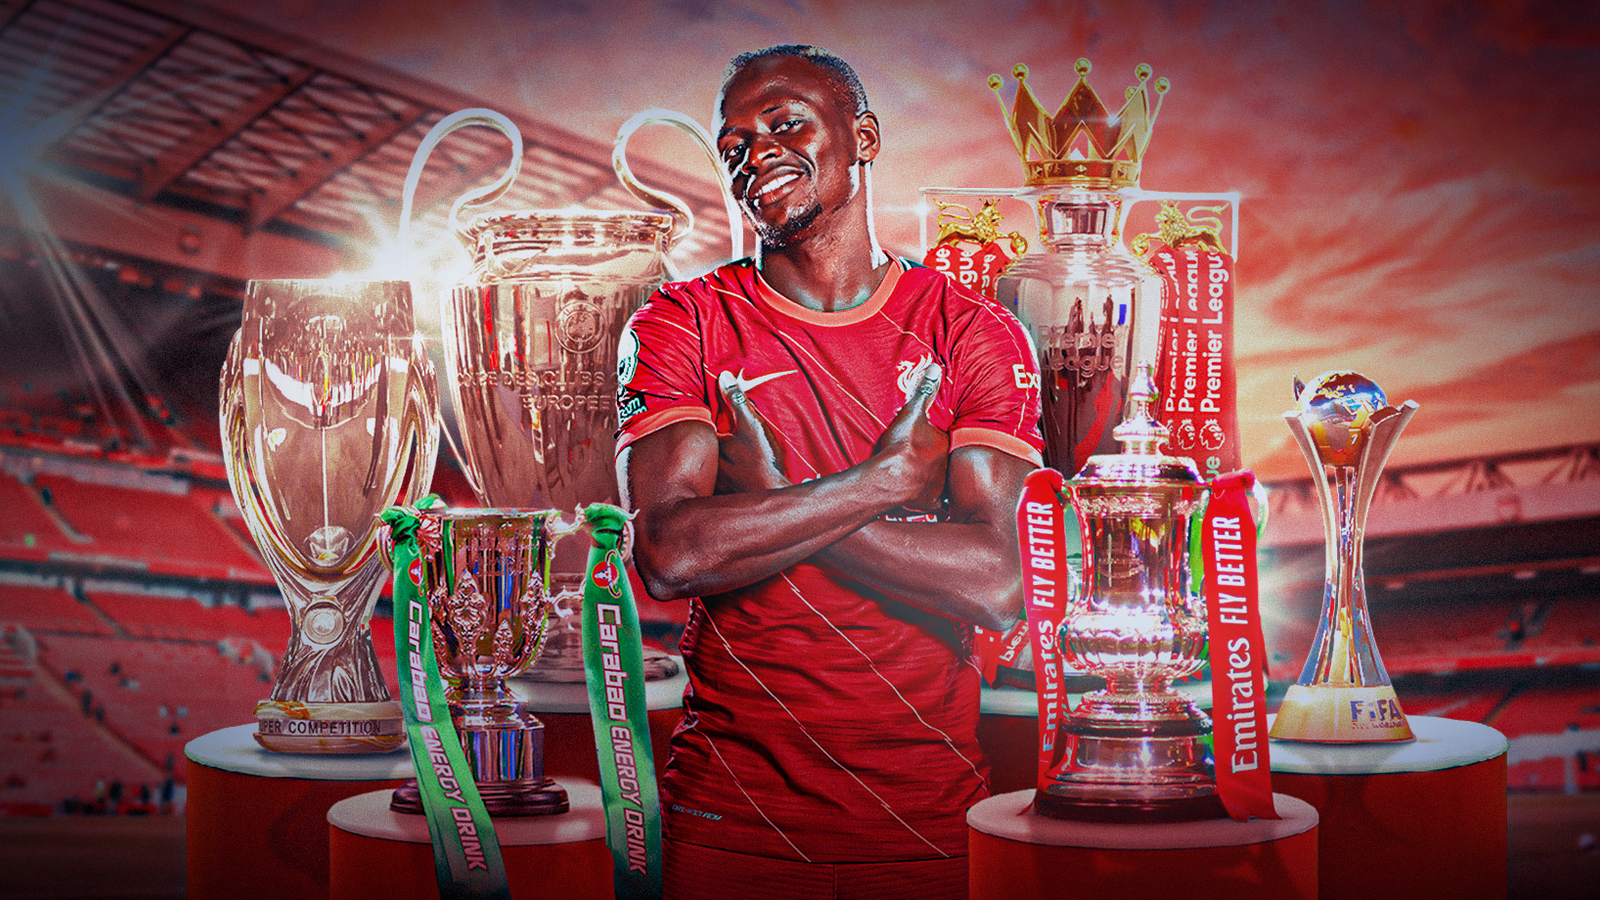 Wallpapers only for KOP: Super Cup! Super Mane!| All Football